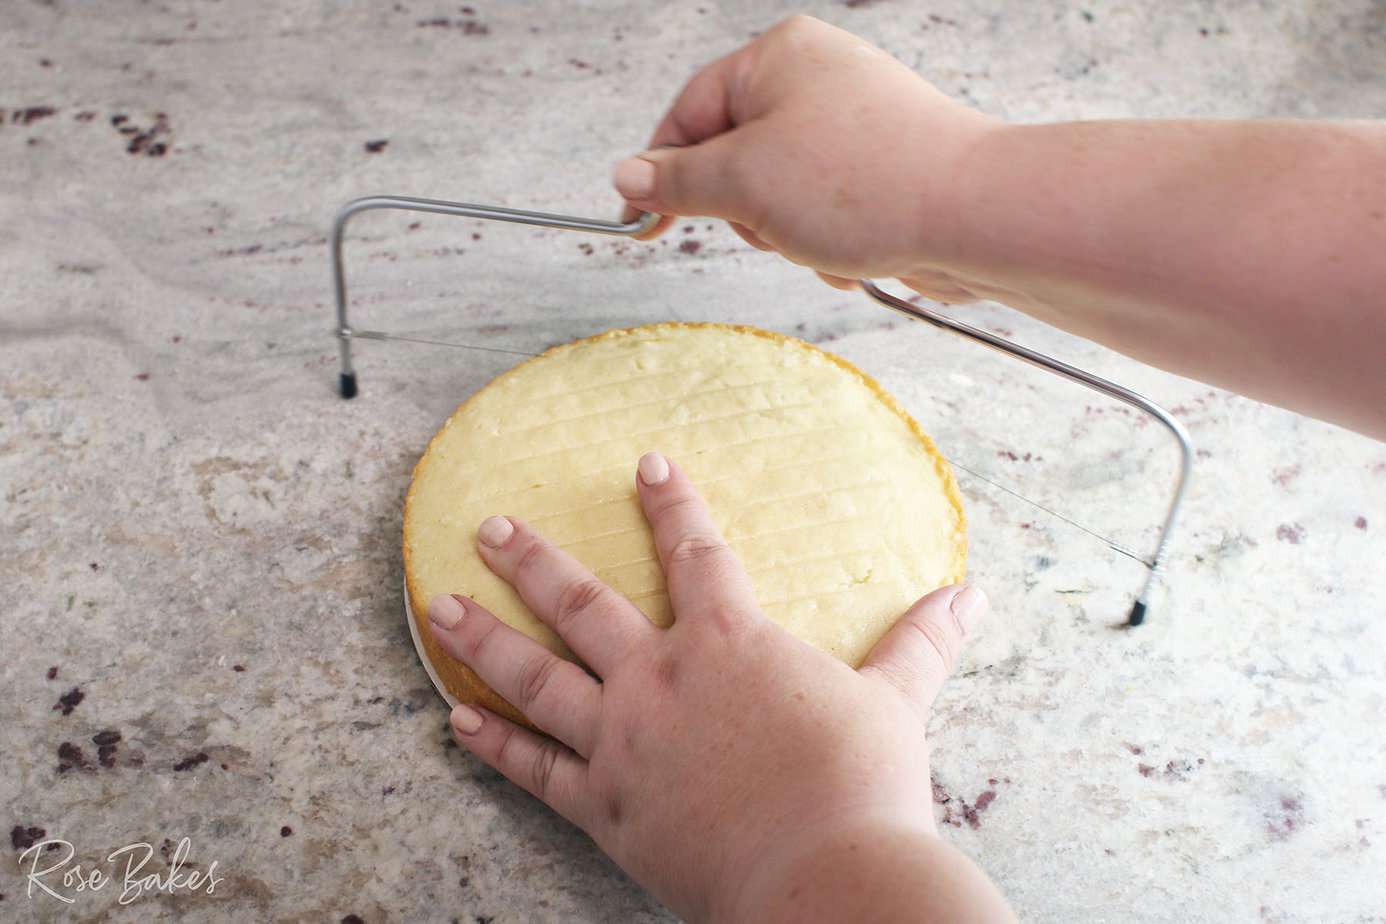 cutting the dome off a cake with a cake leveler